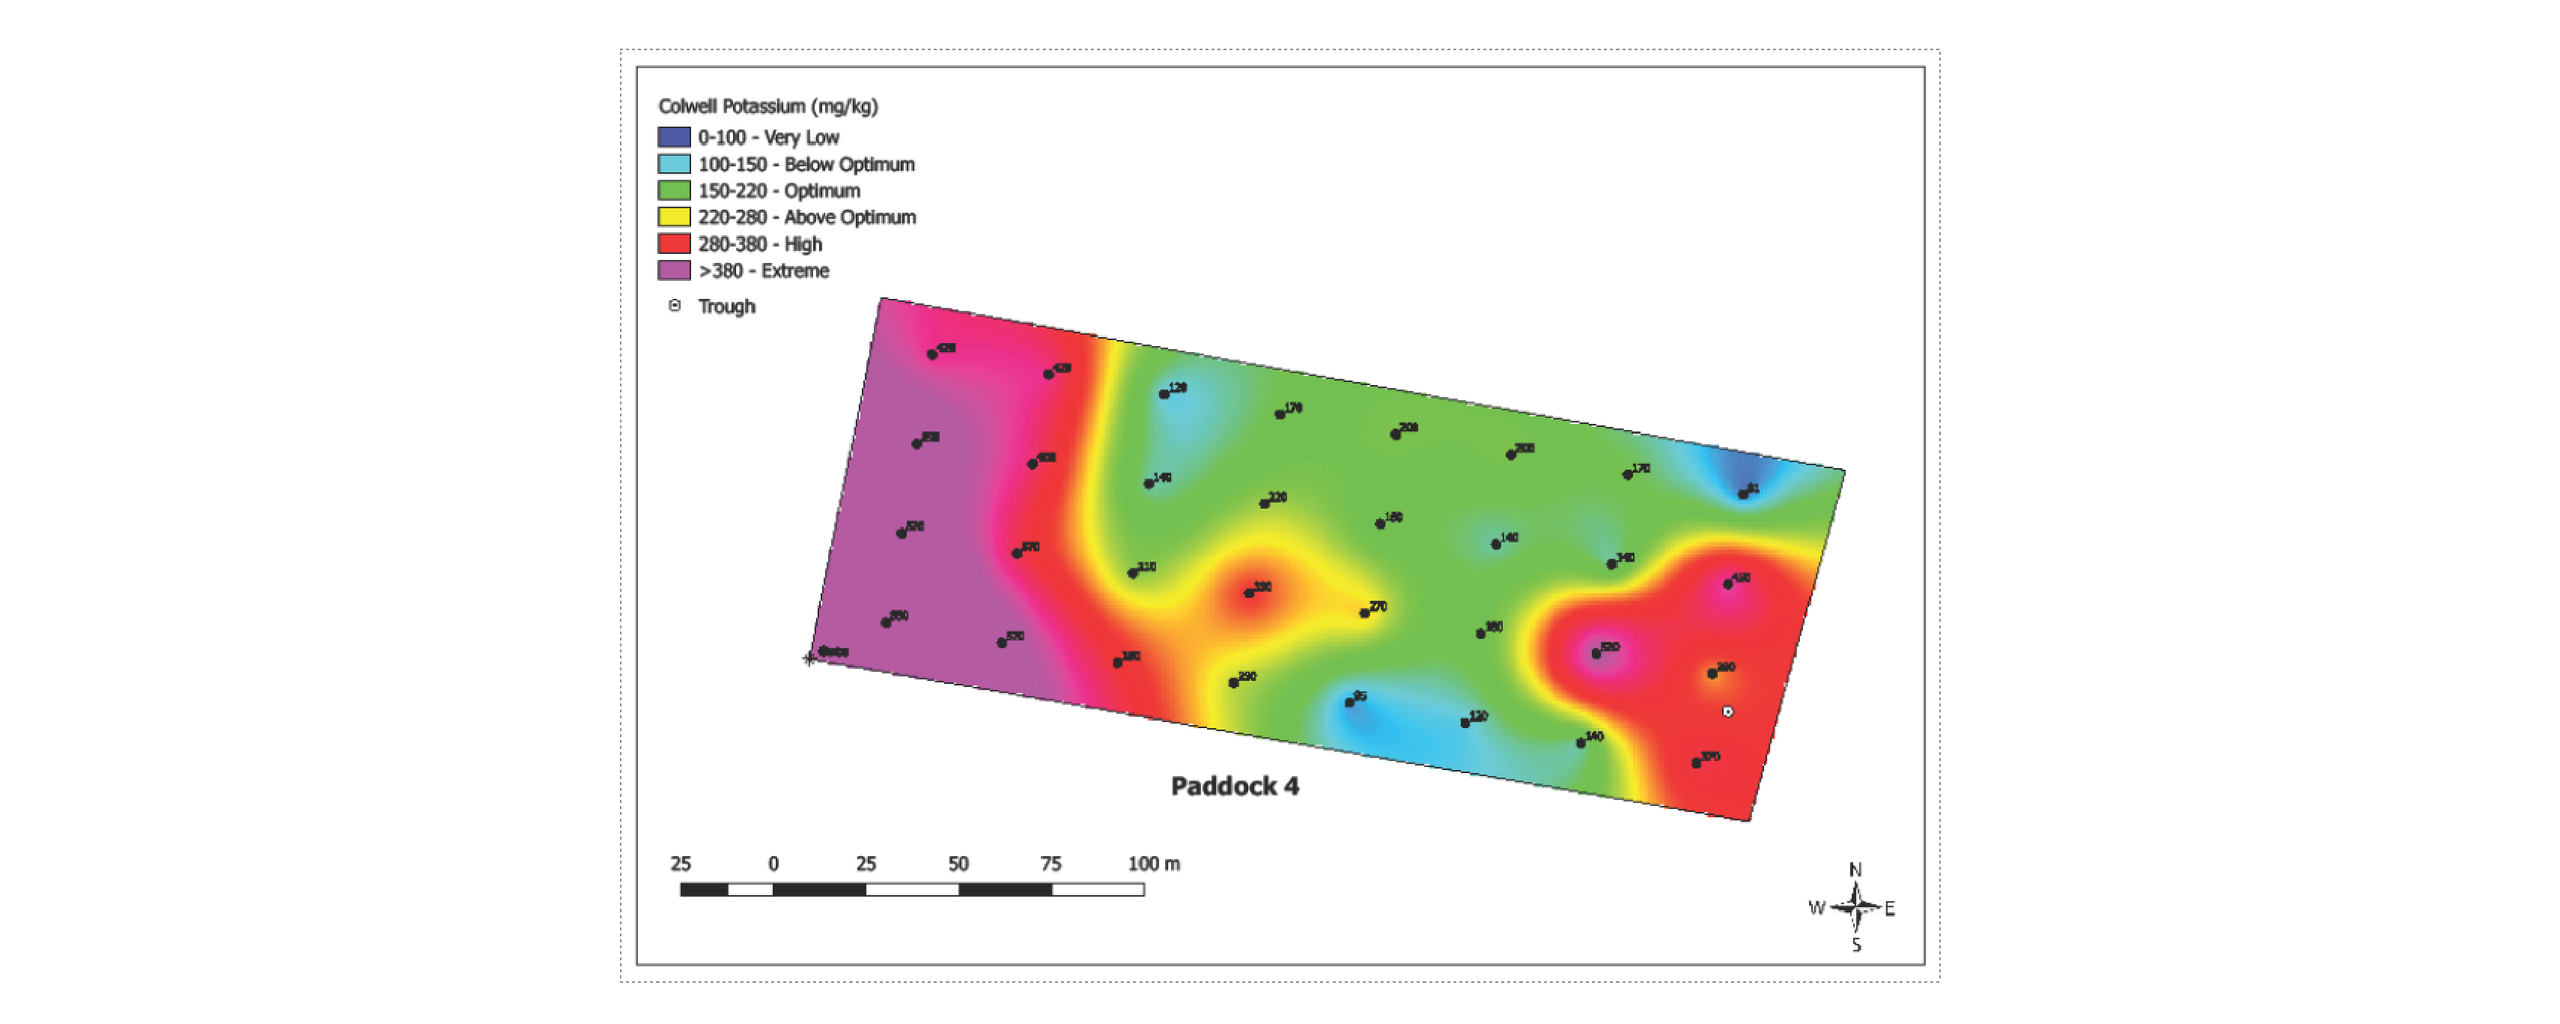 Figure 4. Within paddock nutrient (Colwell potassium) variability on a diary pasture paddock. (Image by Luke Taylor).